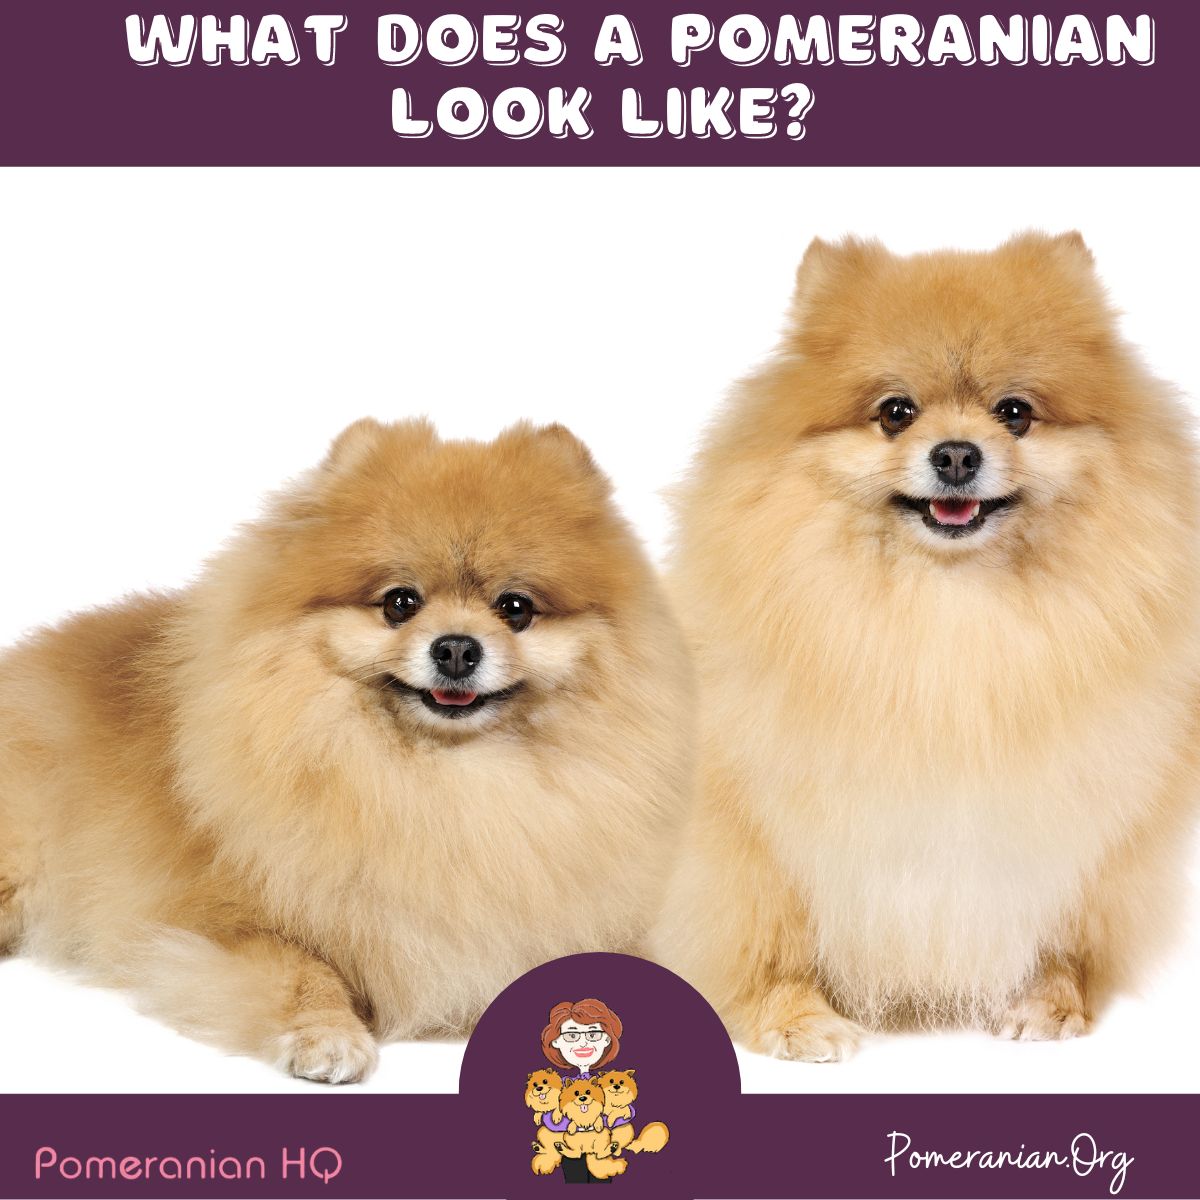 What Does a Pomeranian Look Like?